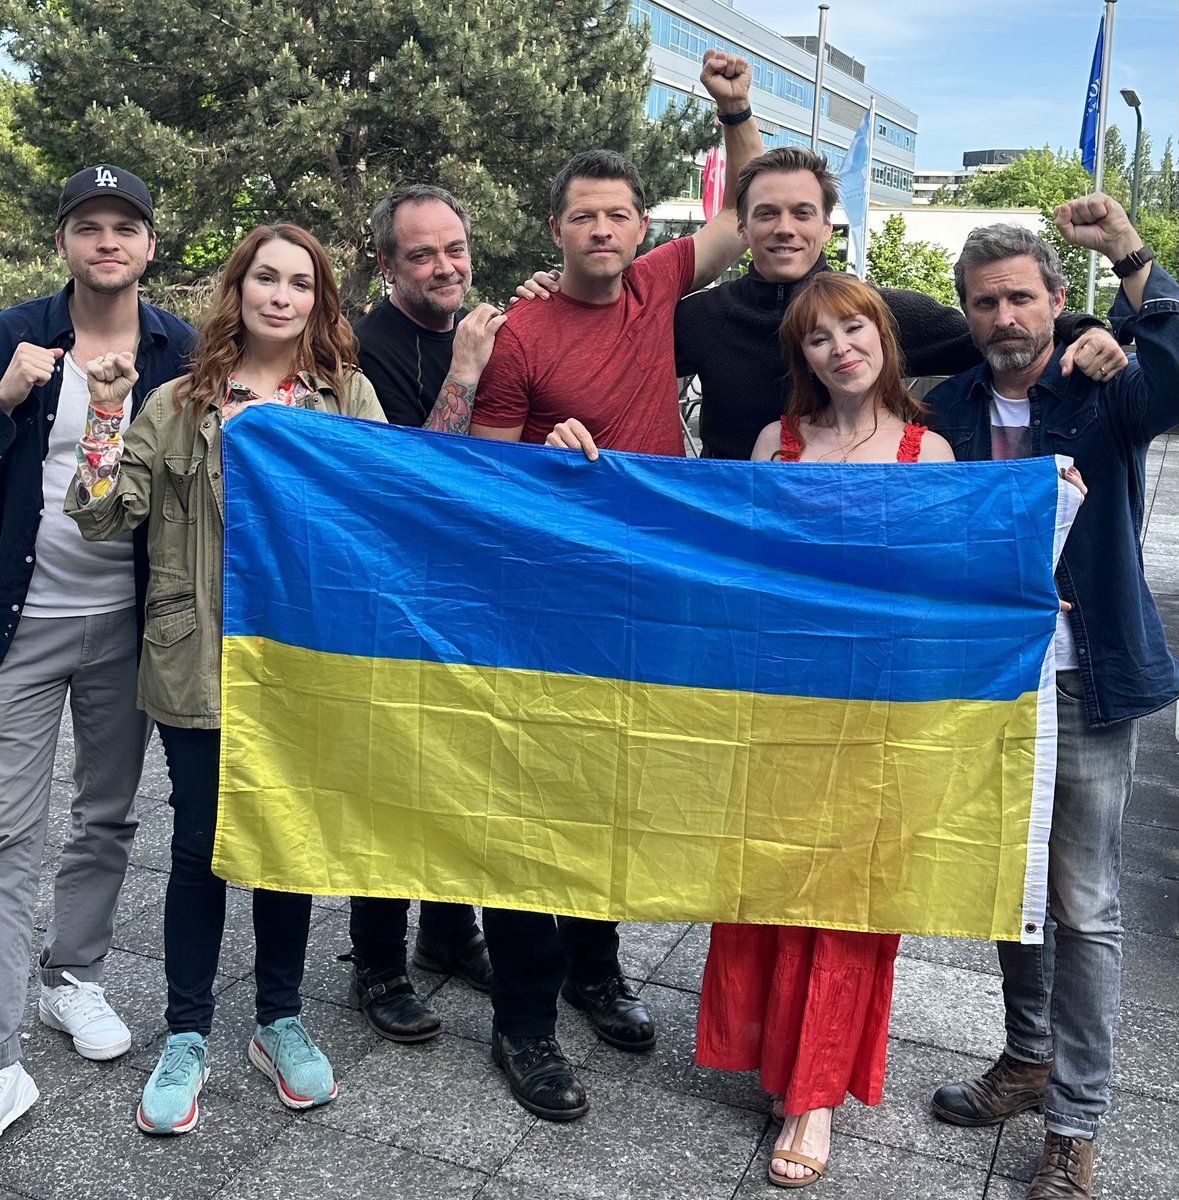 A shoutout to all fans of Supernatural ❤️🇺🇦